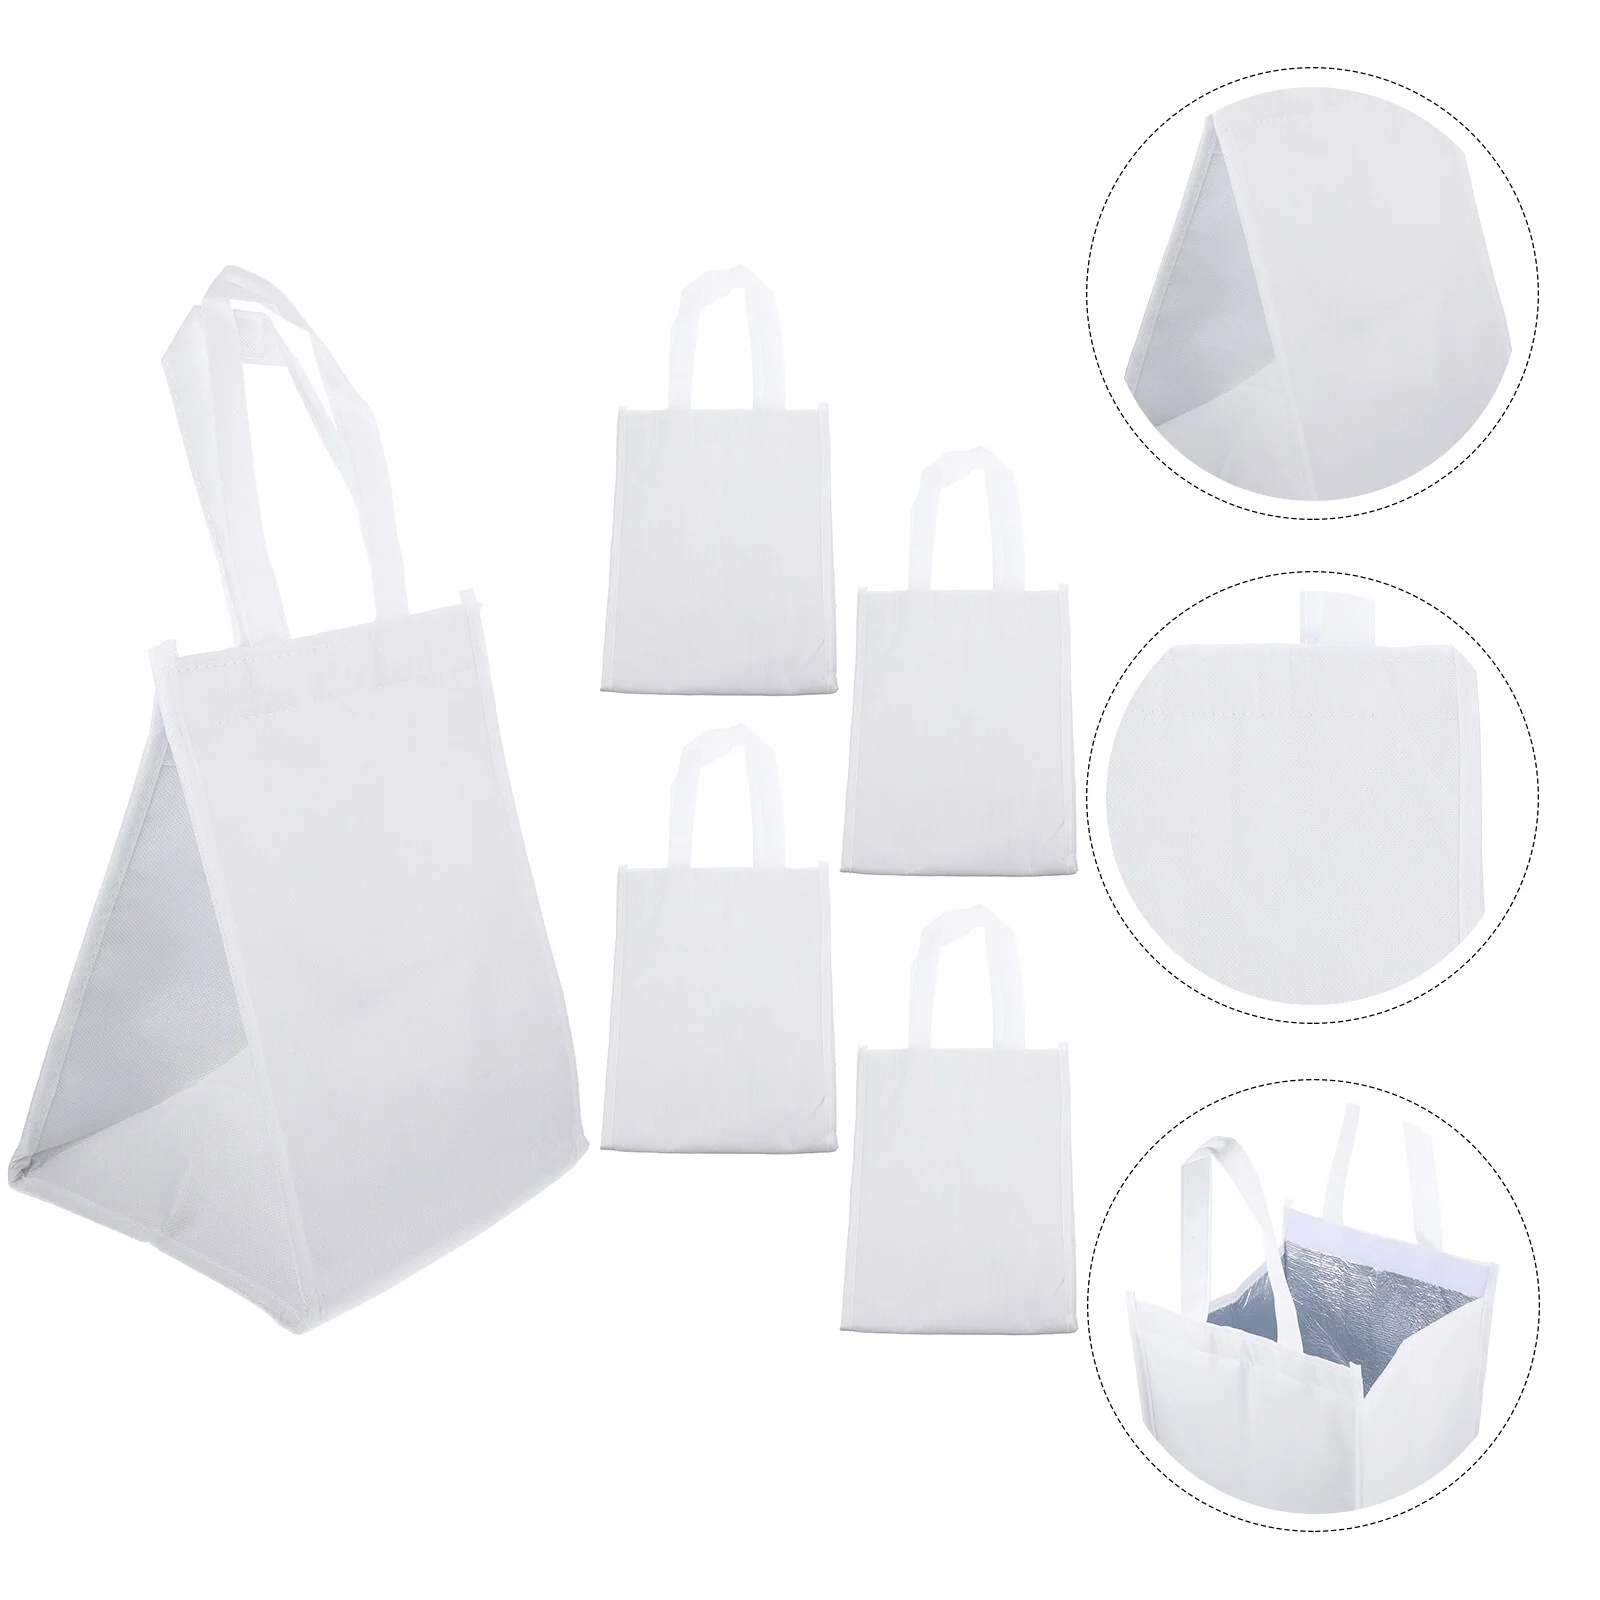 

Insulation Bags Insulated Travel Food Delivery Grocery Hot Cooler Tote Thermal Shopping Cart Groceries